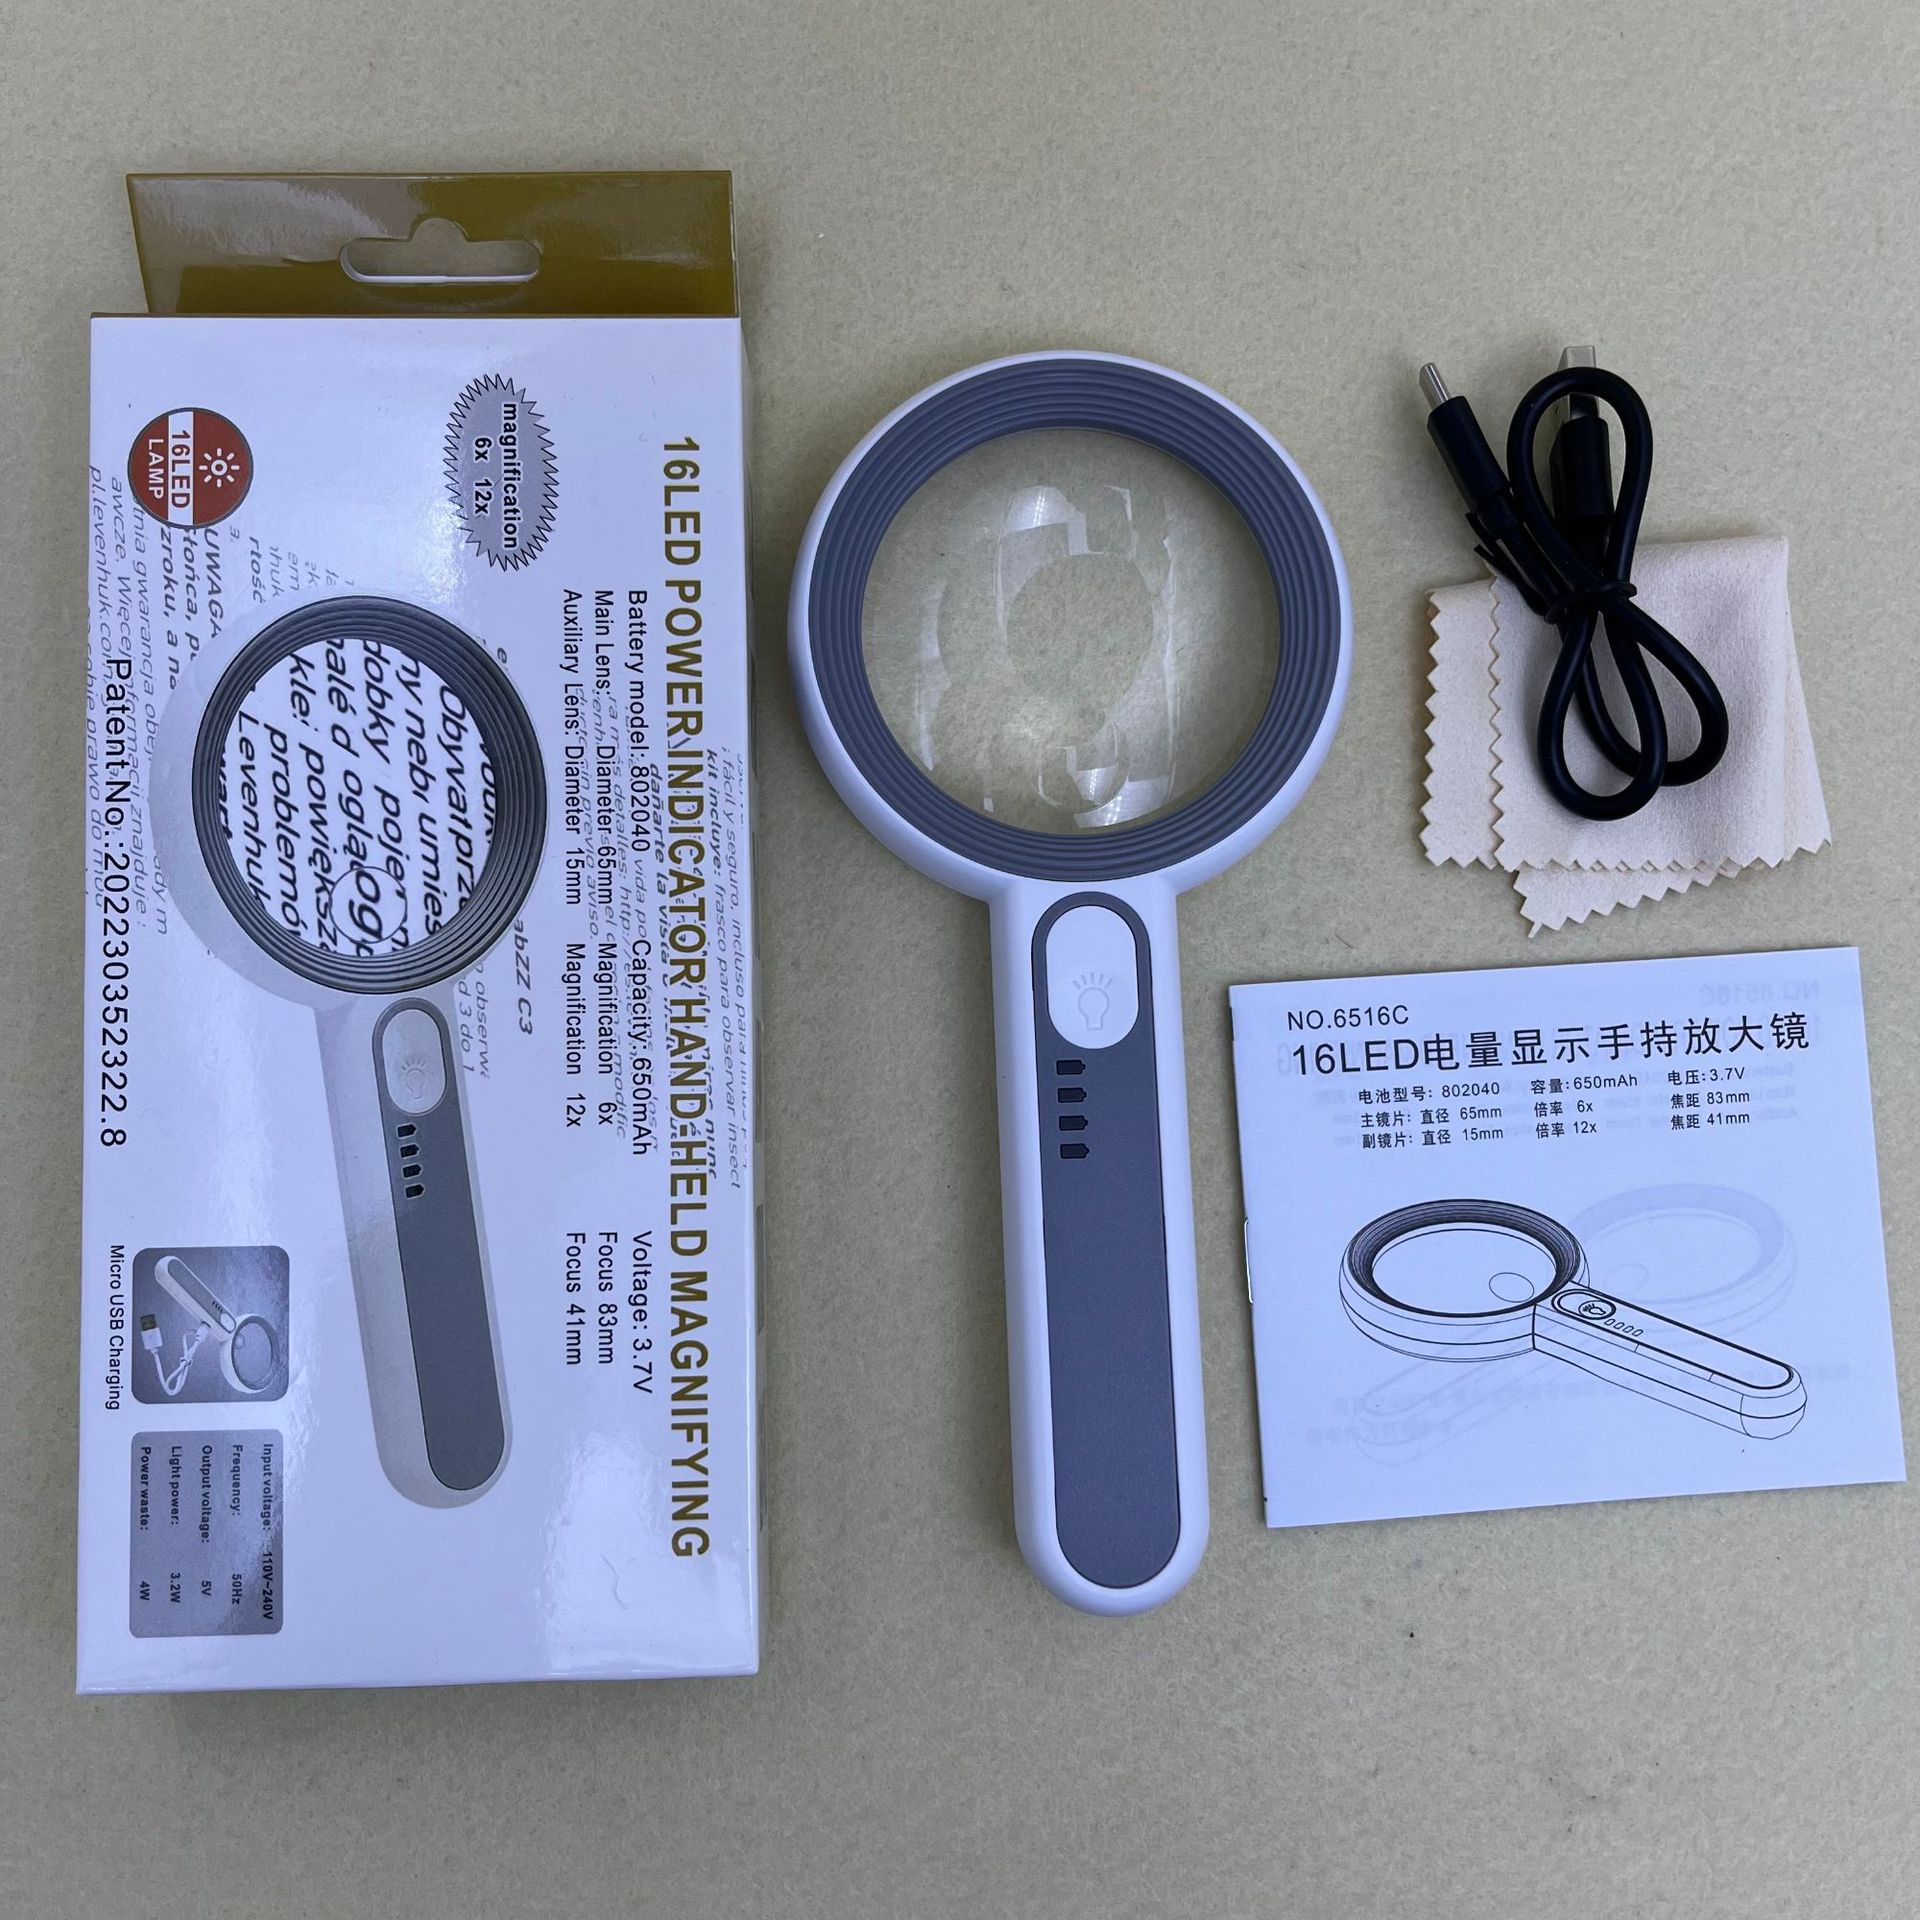 New 6516c Handheld Magnifying Glass 16 LED Lights Three-Gear Brightness Adjustment Touch Switch with Power Display